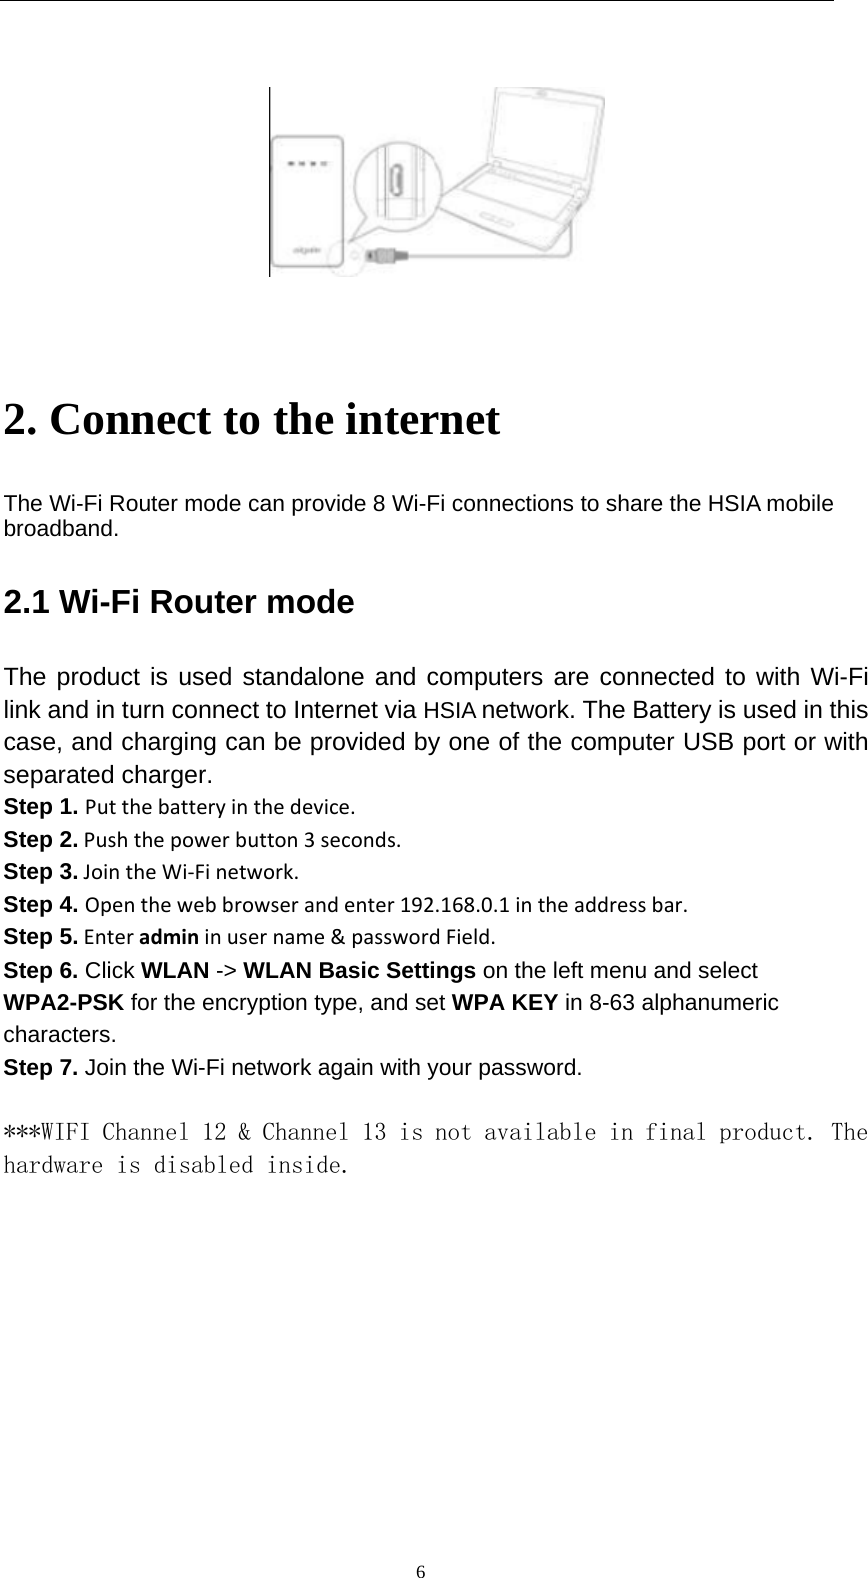   6    2. Connect to the internet The Wi-Fi Router mode can provide 8 Wi-Fi connections to share the HSIA mobile broadband. 2.1 Wi-Fi Router mode The product is used standalone and computers are connected to with Wi-Fi link and in turn connect to Internet via HSIA network. The Battery is used in this case, and charging can be provided by one of the computer USB port or with separated charger. Step 1. Putthebatteryinthedevice.Step 2.Pushthepowerbutton3seconds.Step 3.JointheWi‐Finetwork.Step 4. Openthewebbrowserandenter192.168.0.1intheaddressbar.Step 5.Enteradmininusername&amp;passwordField. Step 6. Click WLAN -&gt; WLAN Basic Settings on the left menu and select WPA2-PSK for the encryption type, and set WPA KEY in 8-63 alphanumeric characters. Step 7. Join the Wi-Fi network again with your password.  ***WIFI Channel 12 &amp; Channel 13 is not available in final product. The hardware is disabled inside.    